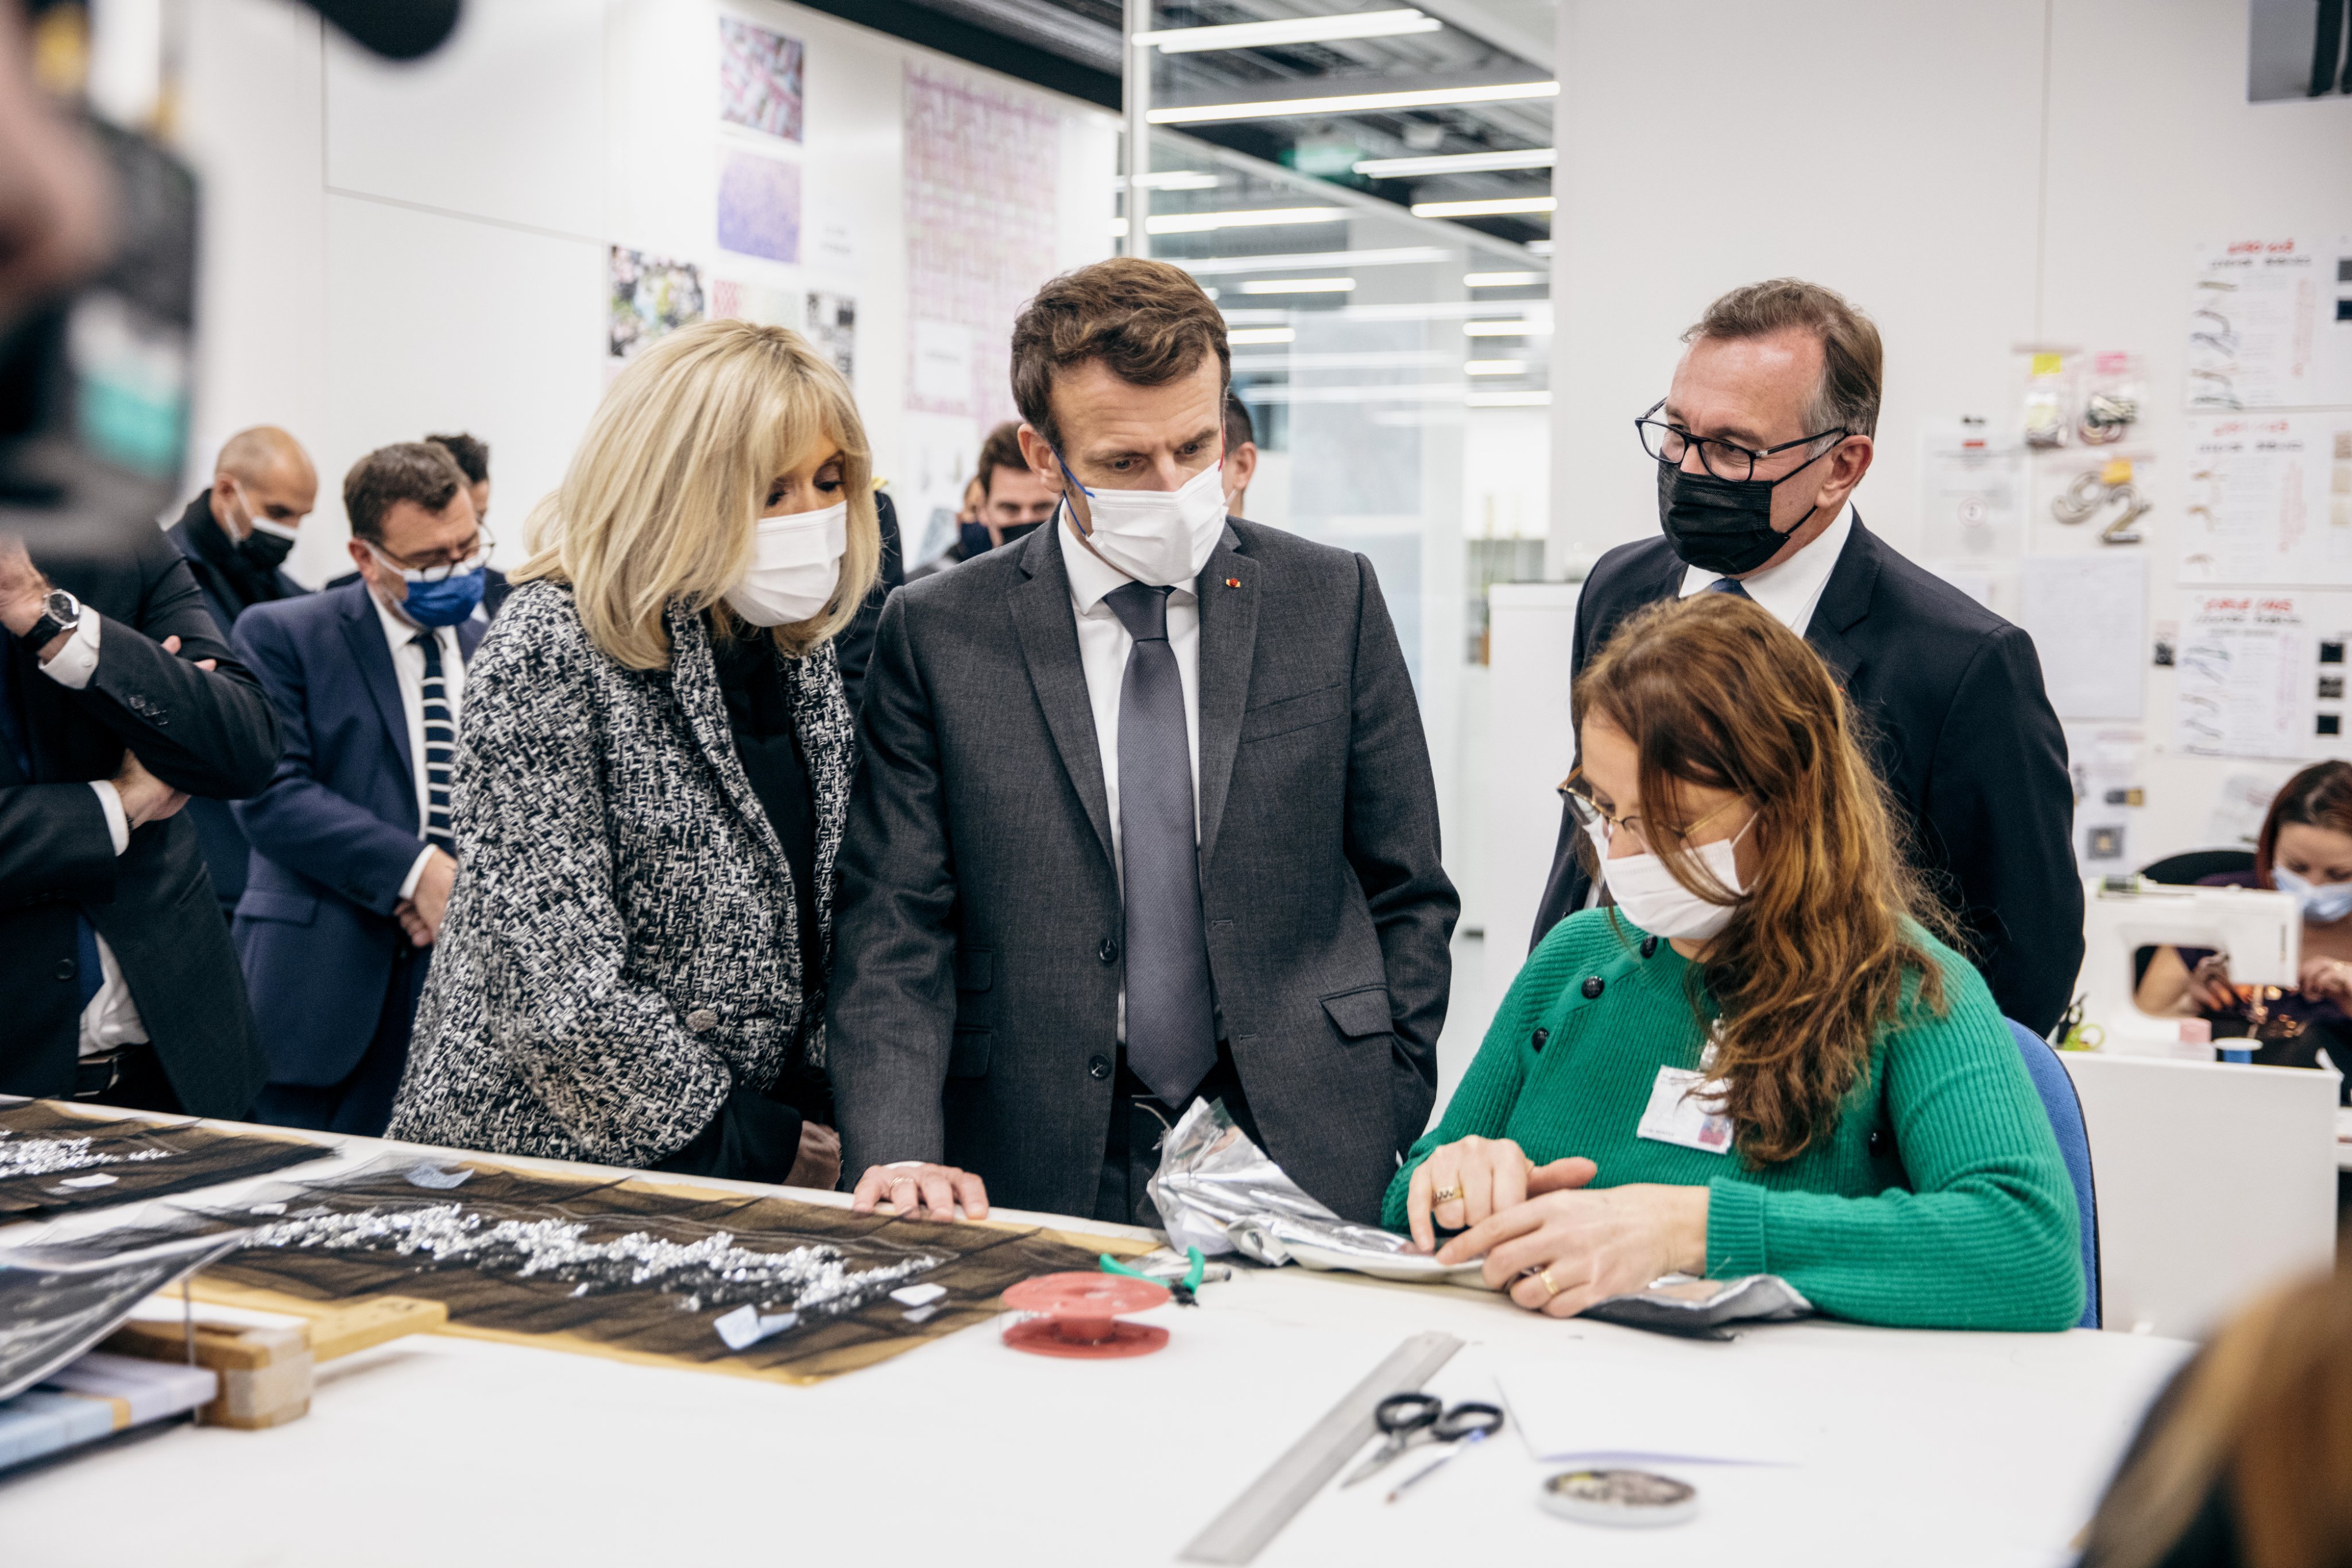 CHANEL on Twitter: "𝘭𝘦19M, a place of work dedicated to the Métiers d'art contributing to the continuation of a unique French heritage, was inaugurated by Bruno Pavlovsky, President of CHANEL SAS